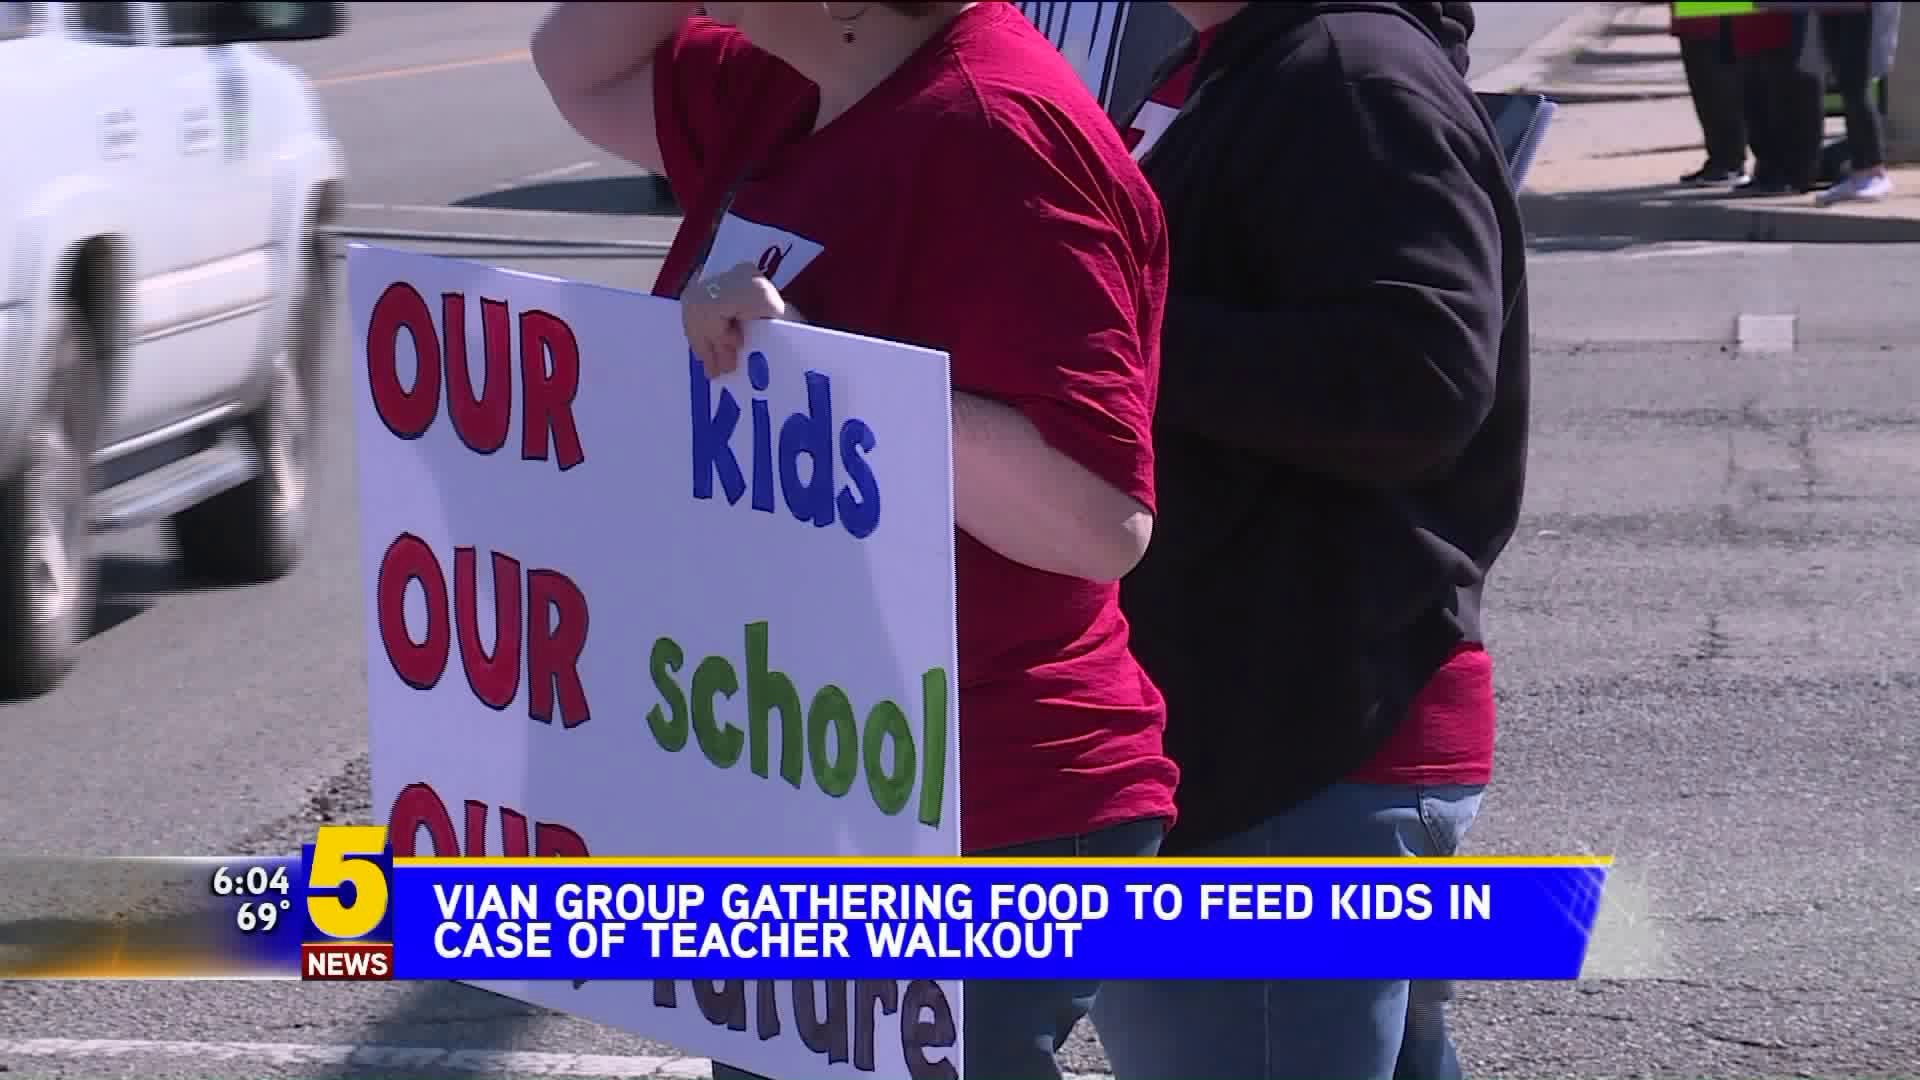 Vian Group Gathering Food For Kids To Prepare For Teacher Walkout